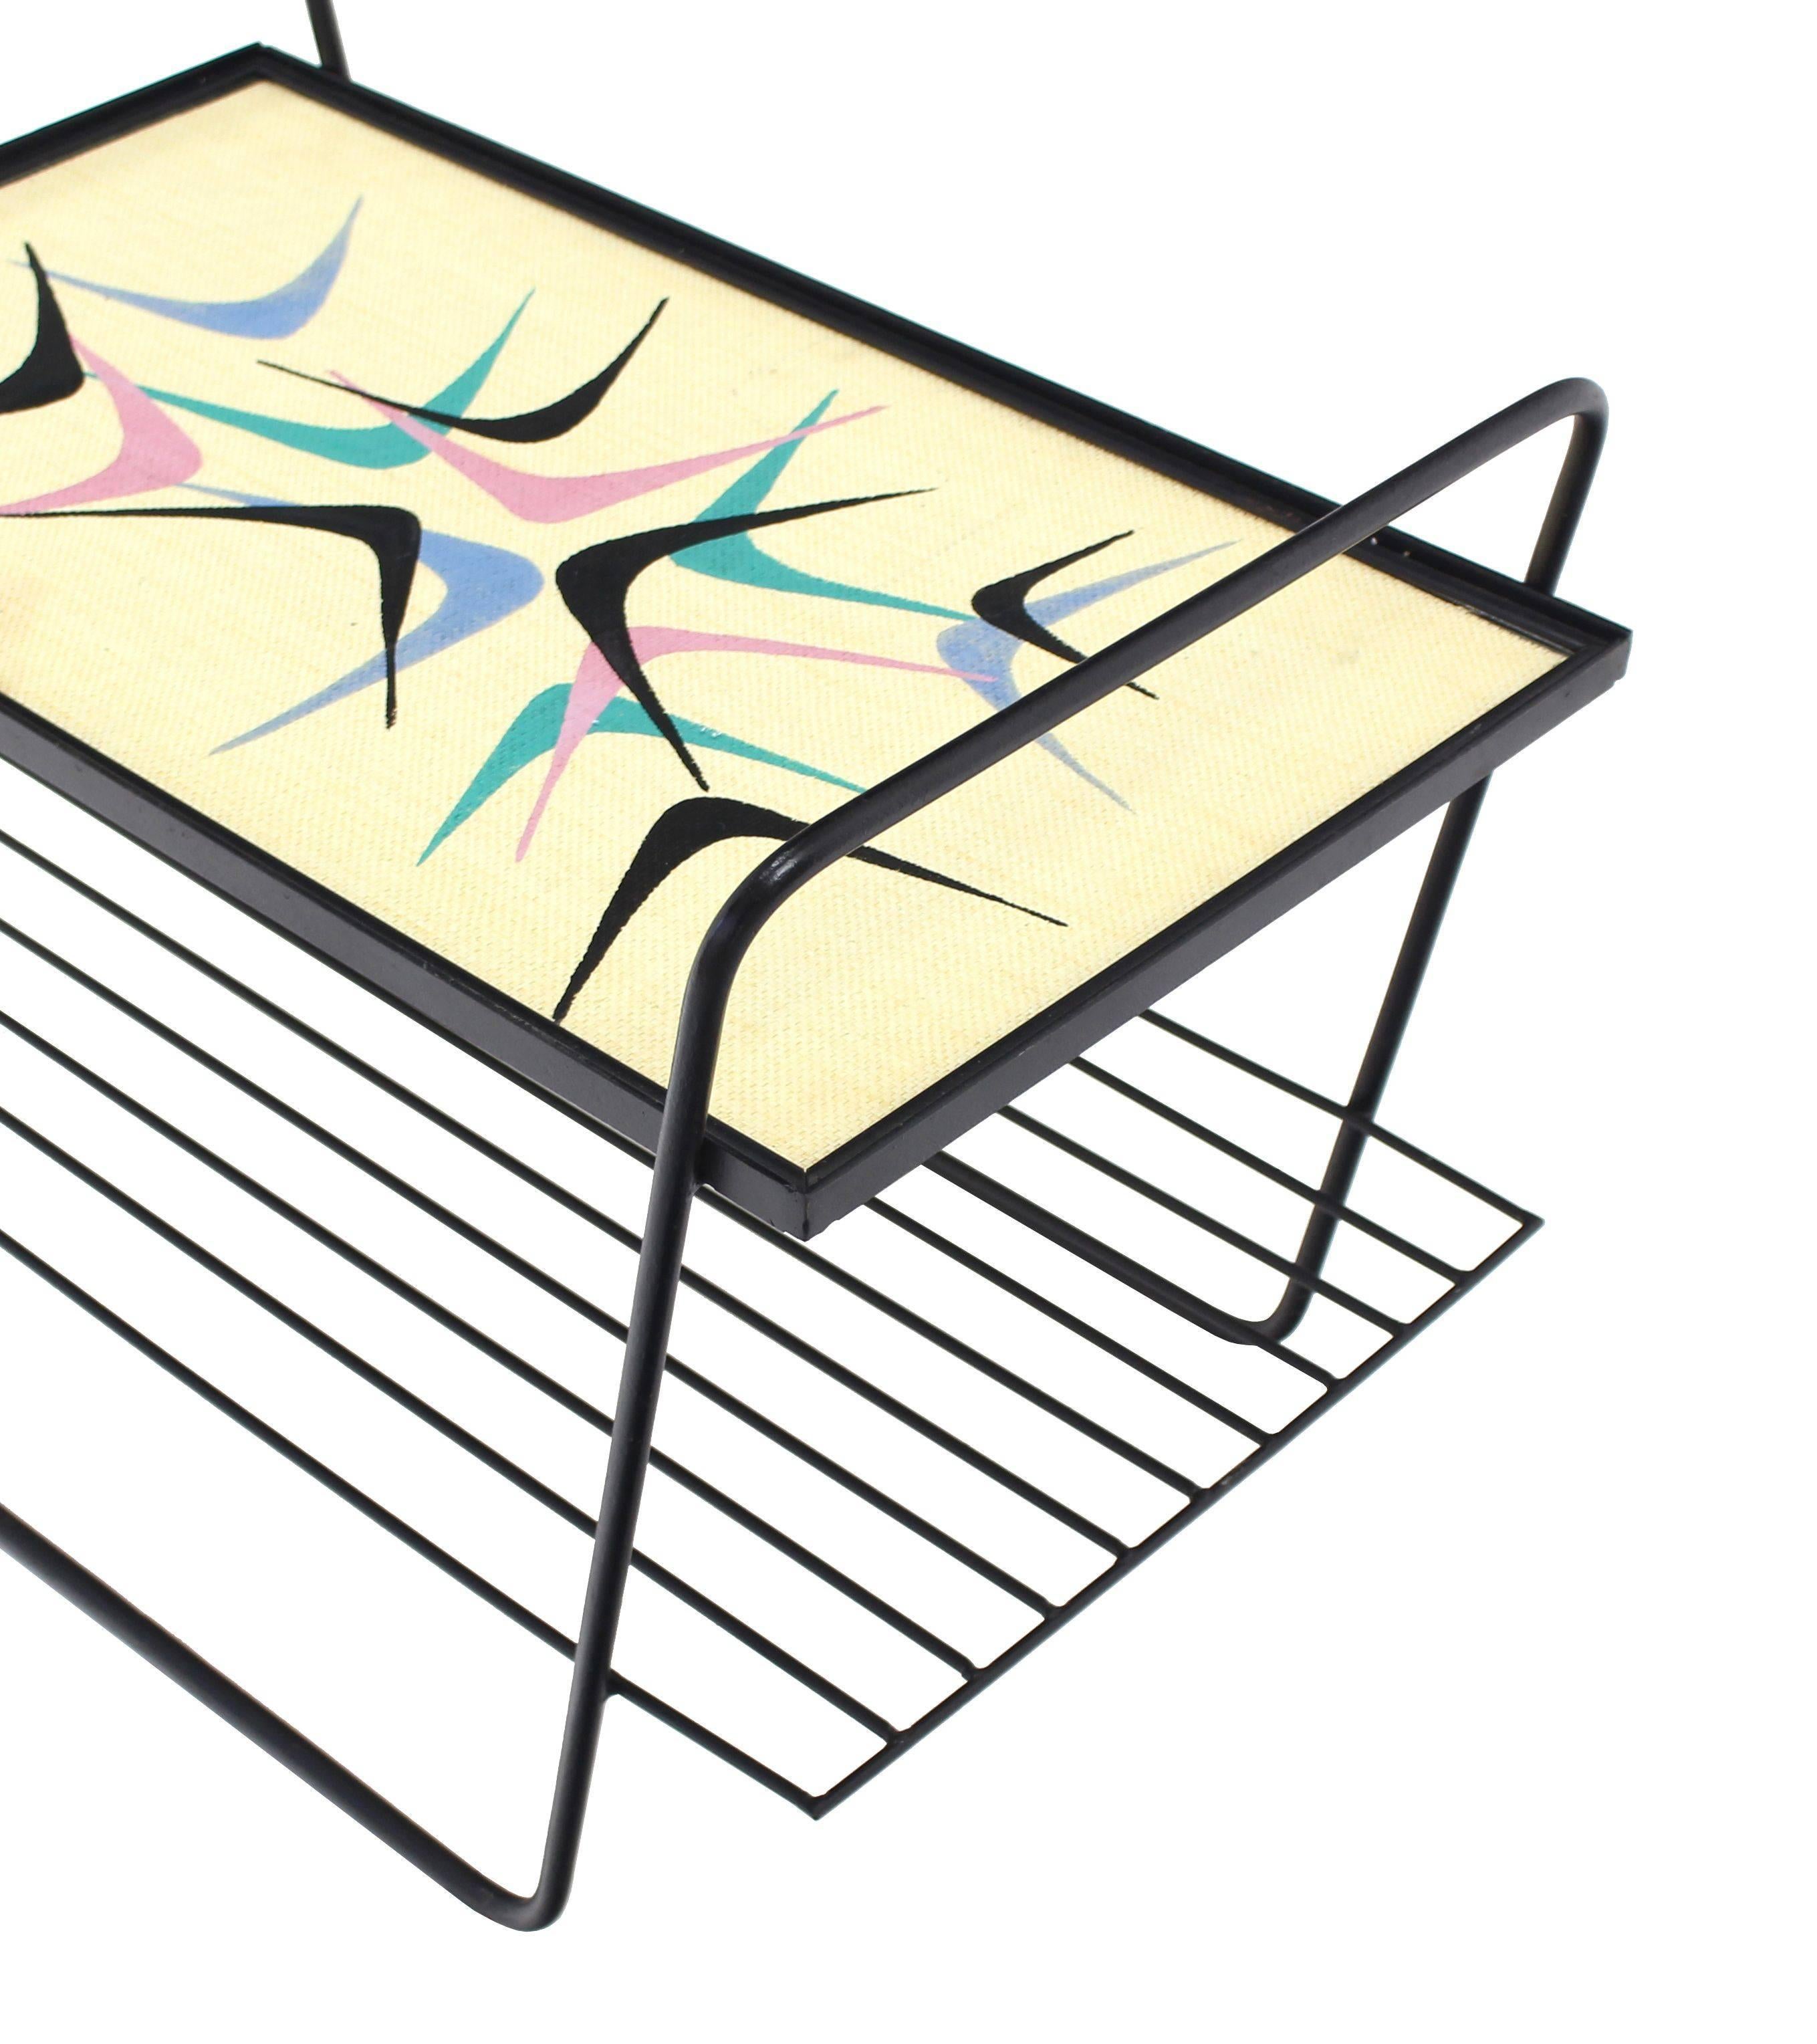 20th Century Abstract Design Glass Top Wire Shelf Mid-Century Modern Side Table Cart Tray For Sale